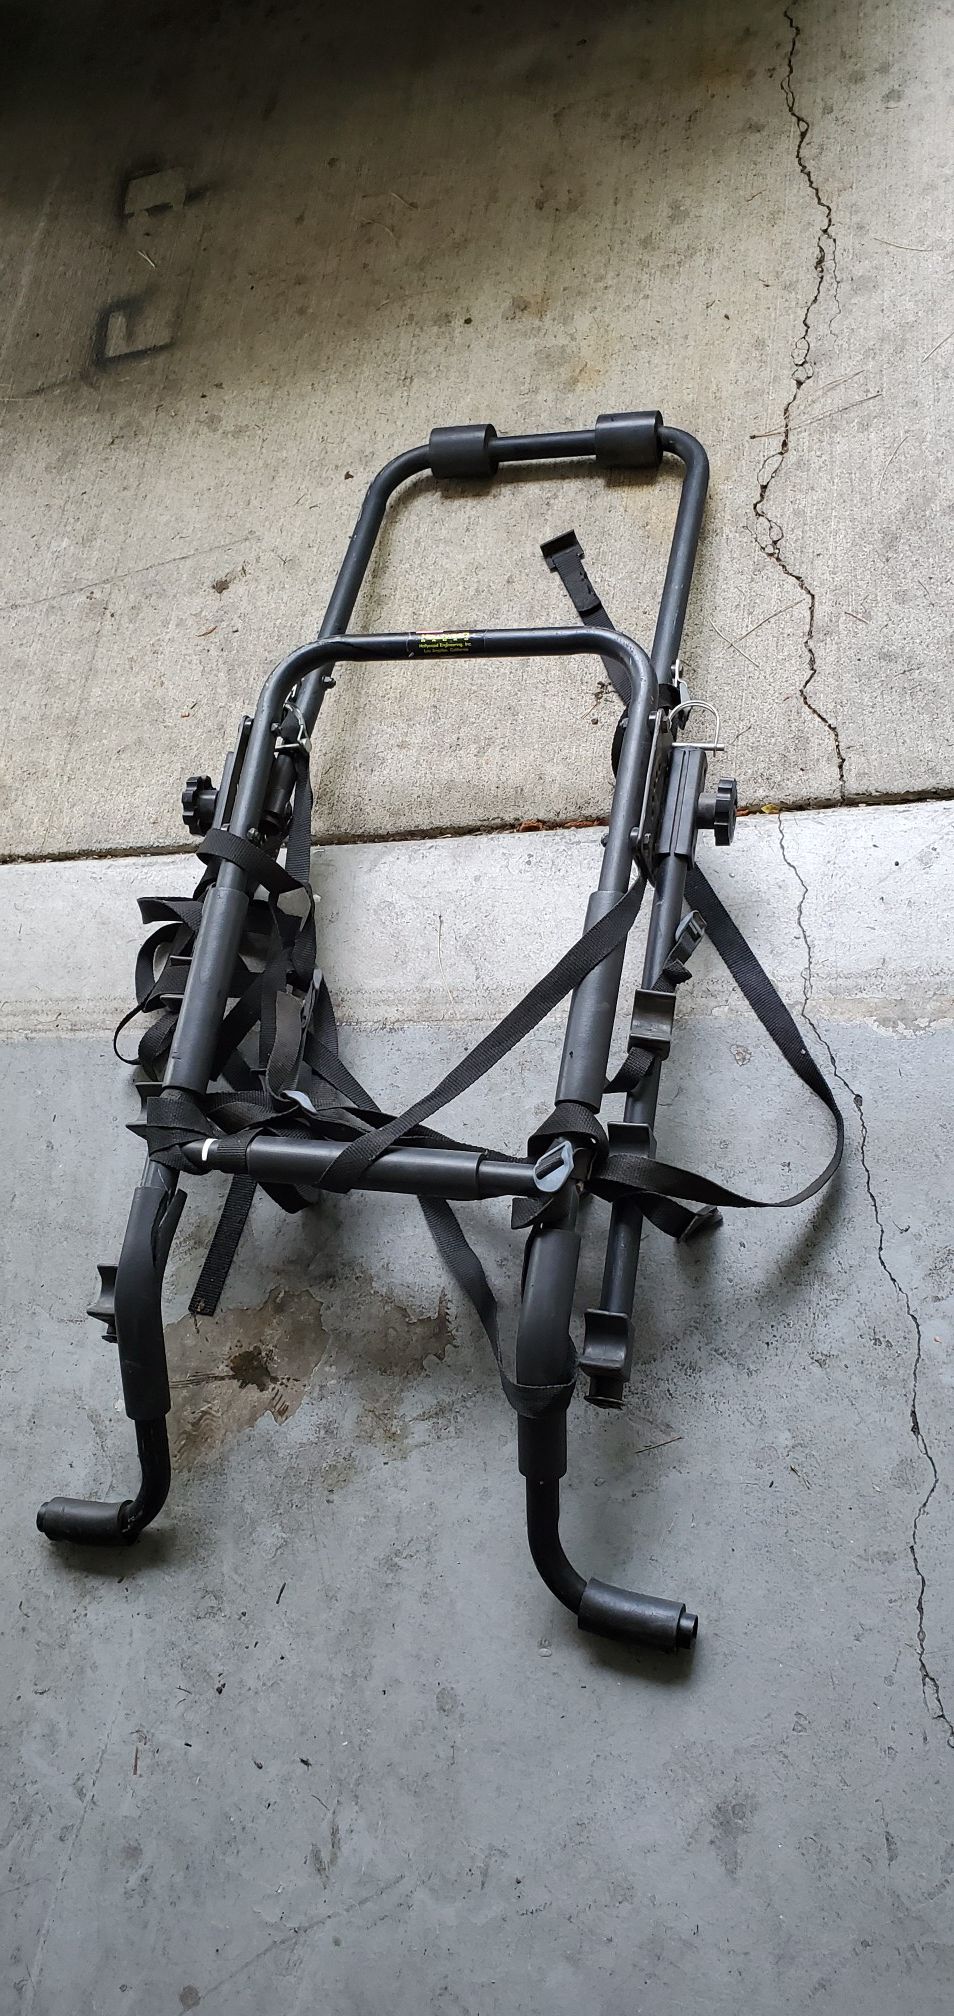 Bicycle rack carrier